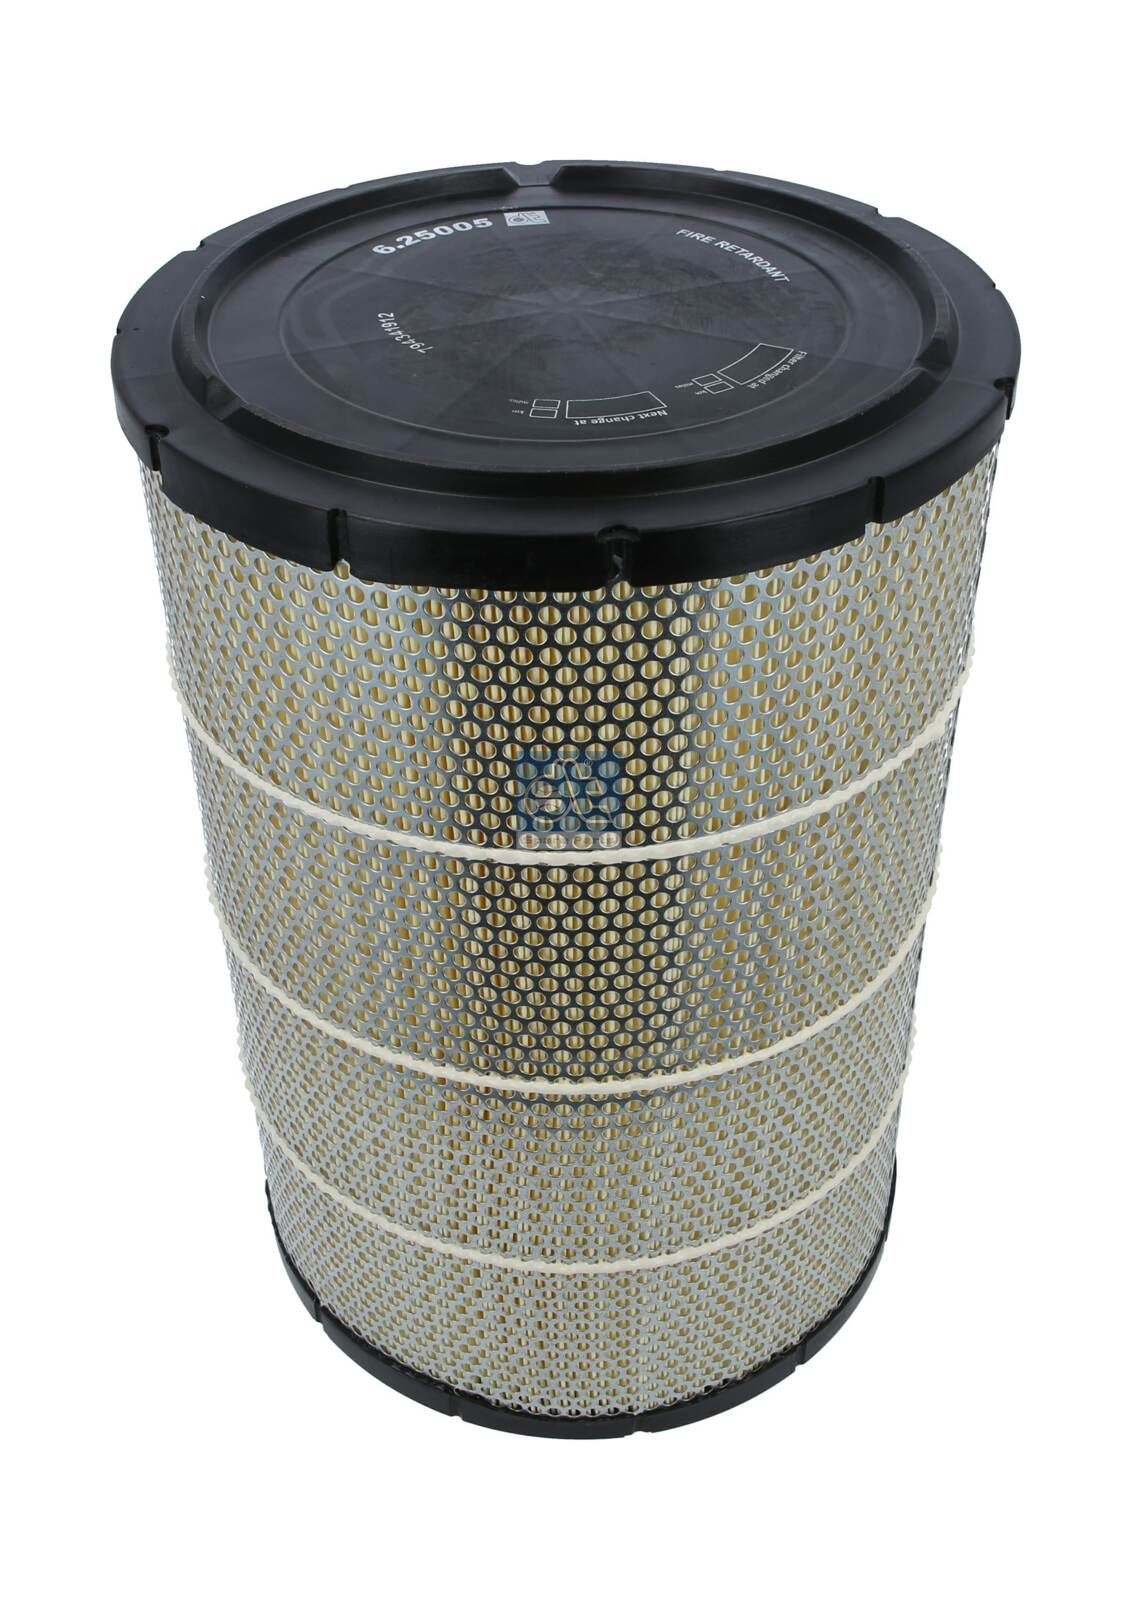 DT Spare Parts 463mm, 310mm, Filter Insert Height: 463mm Engine air filter 6.25005 buy